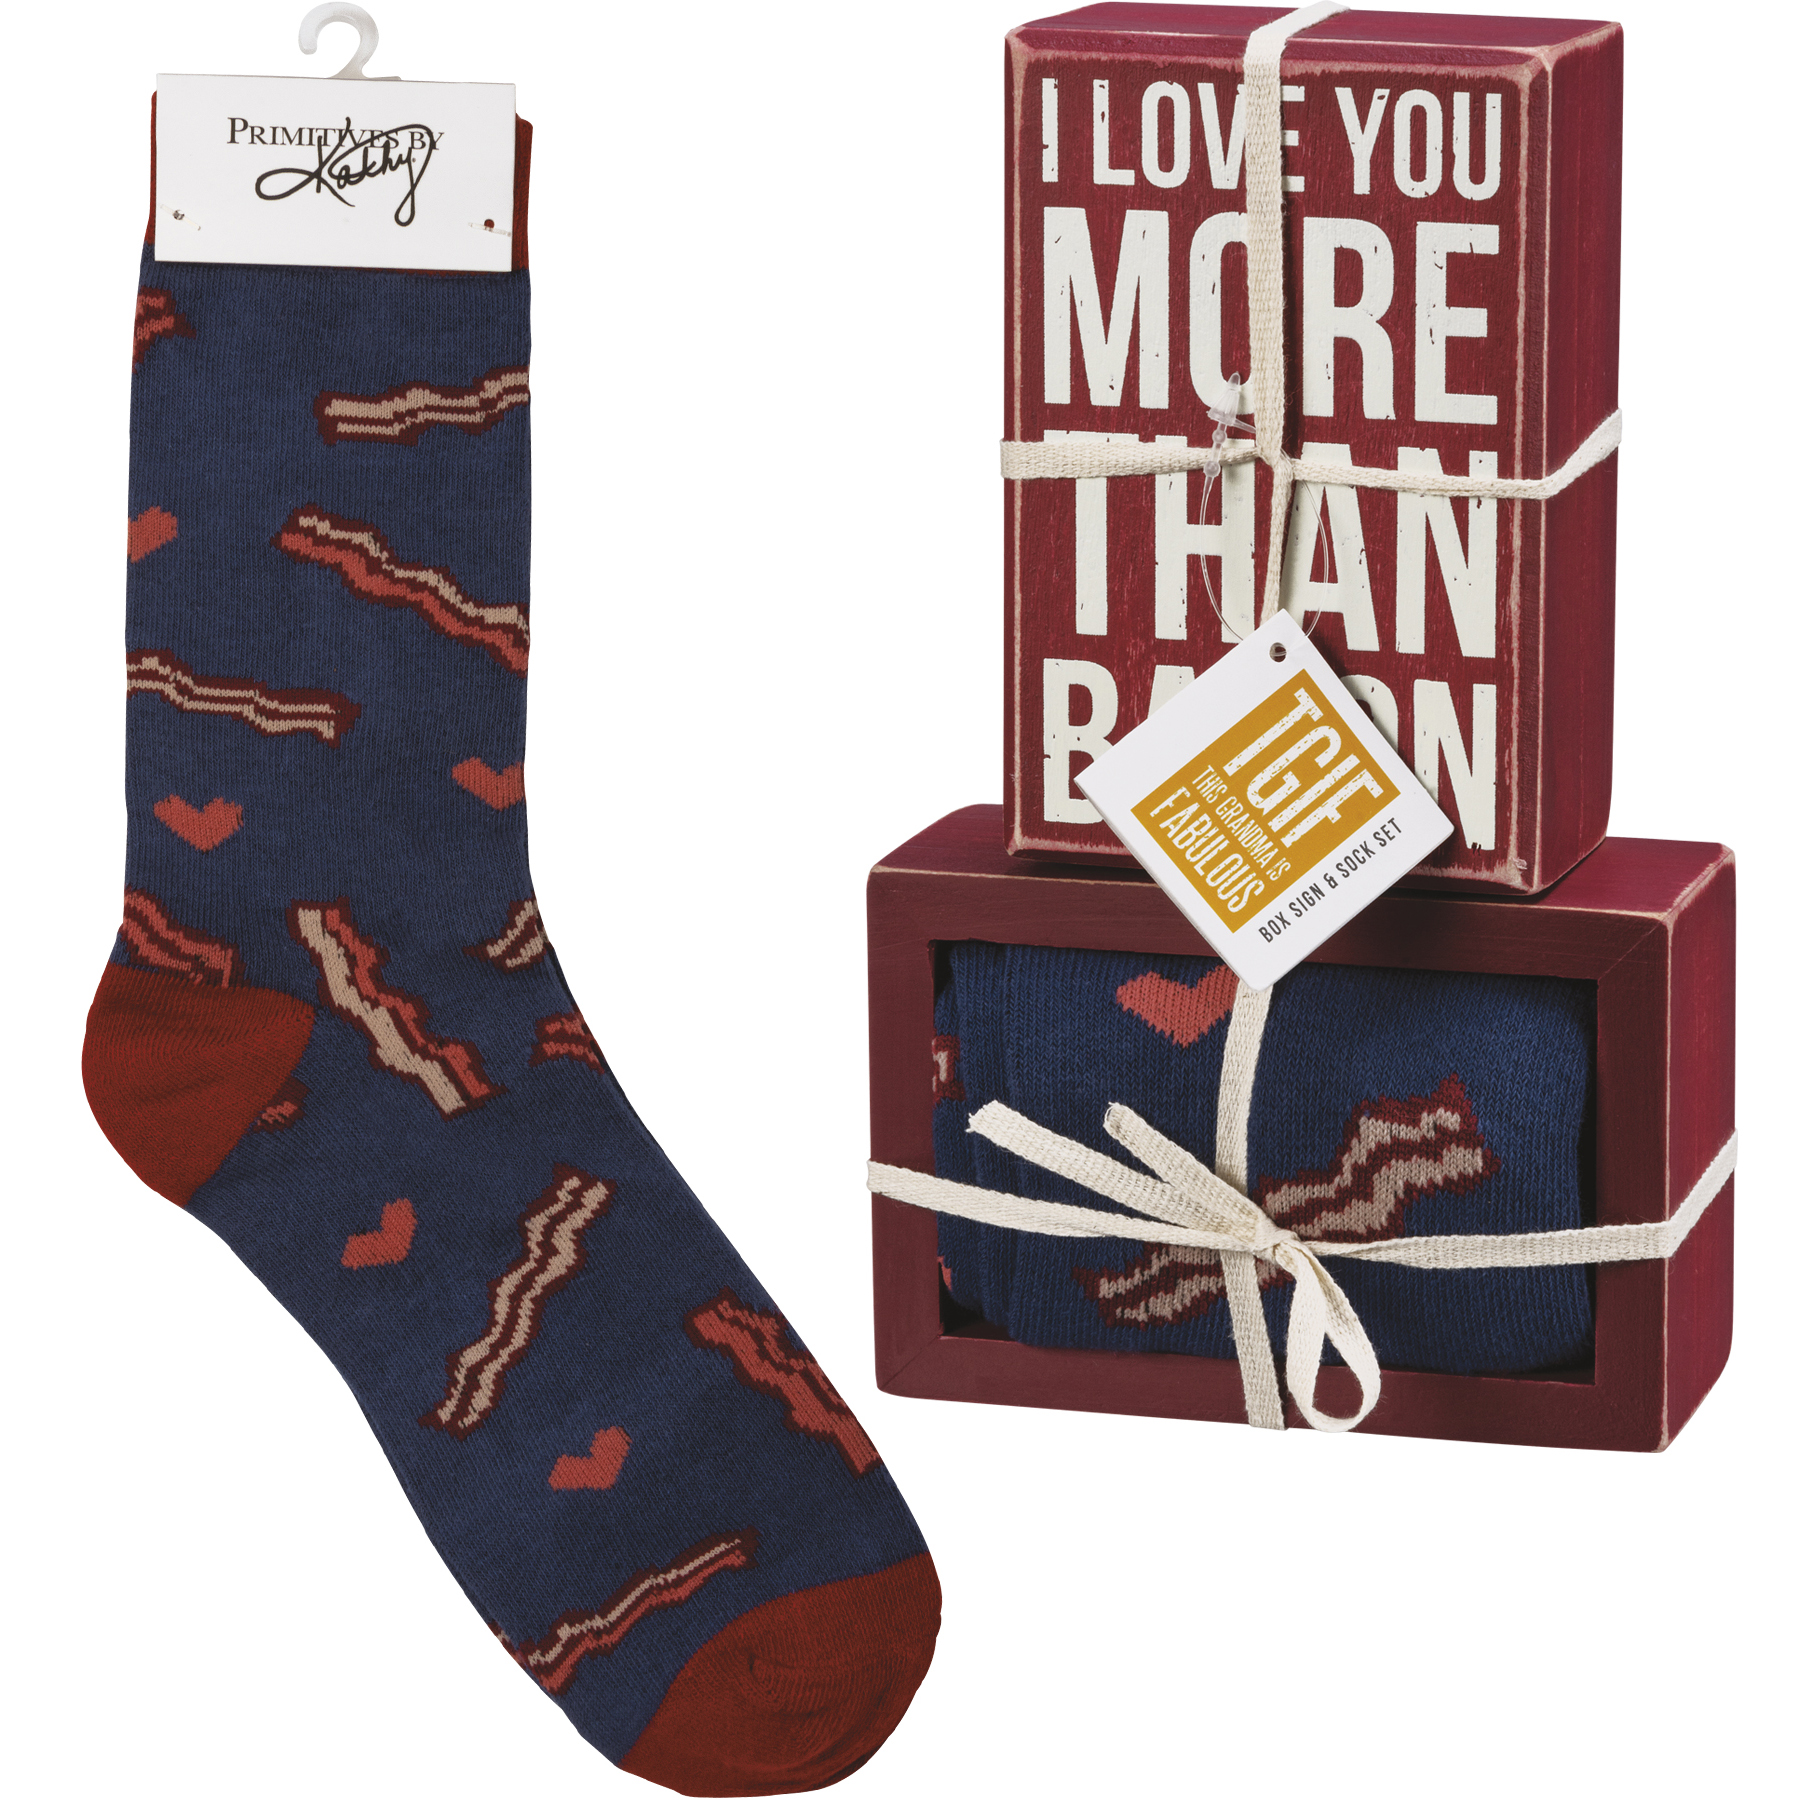 Primitives by Kathy 19176 Classic Box Sign 5 x 4.5-Inches I Love You More Than Bacon